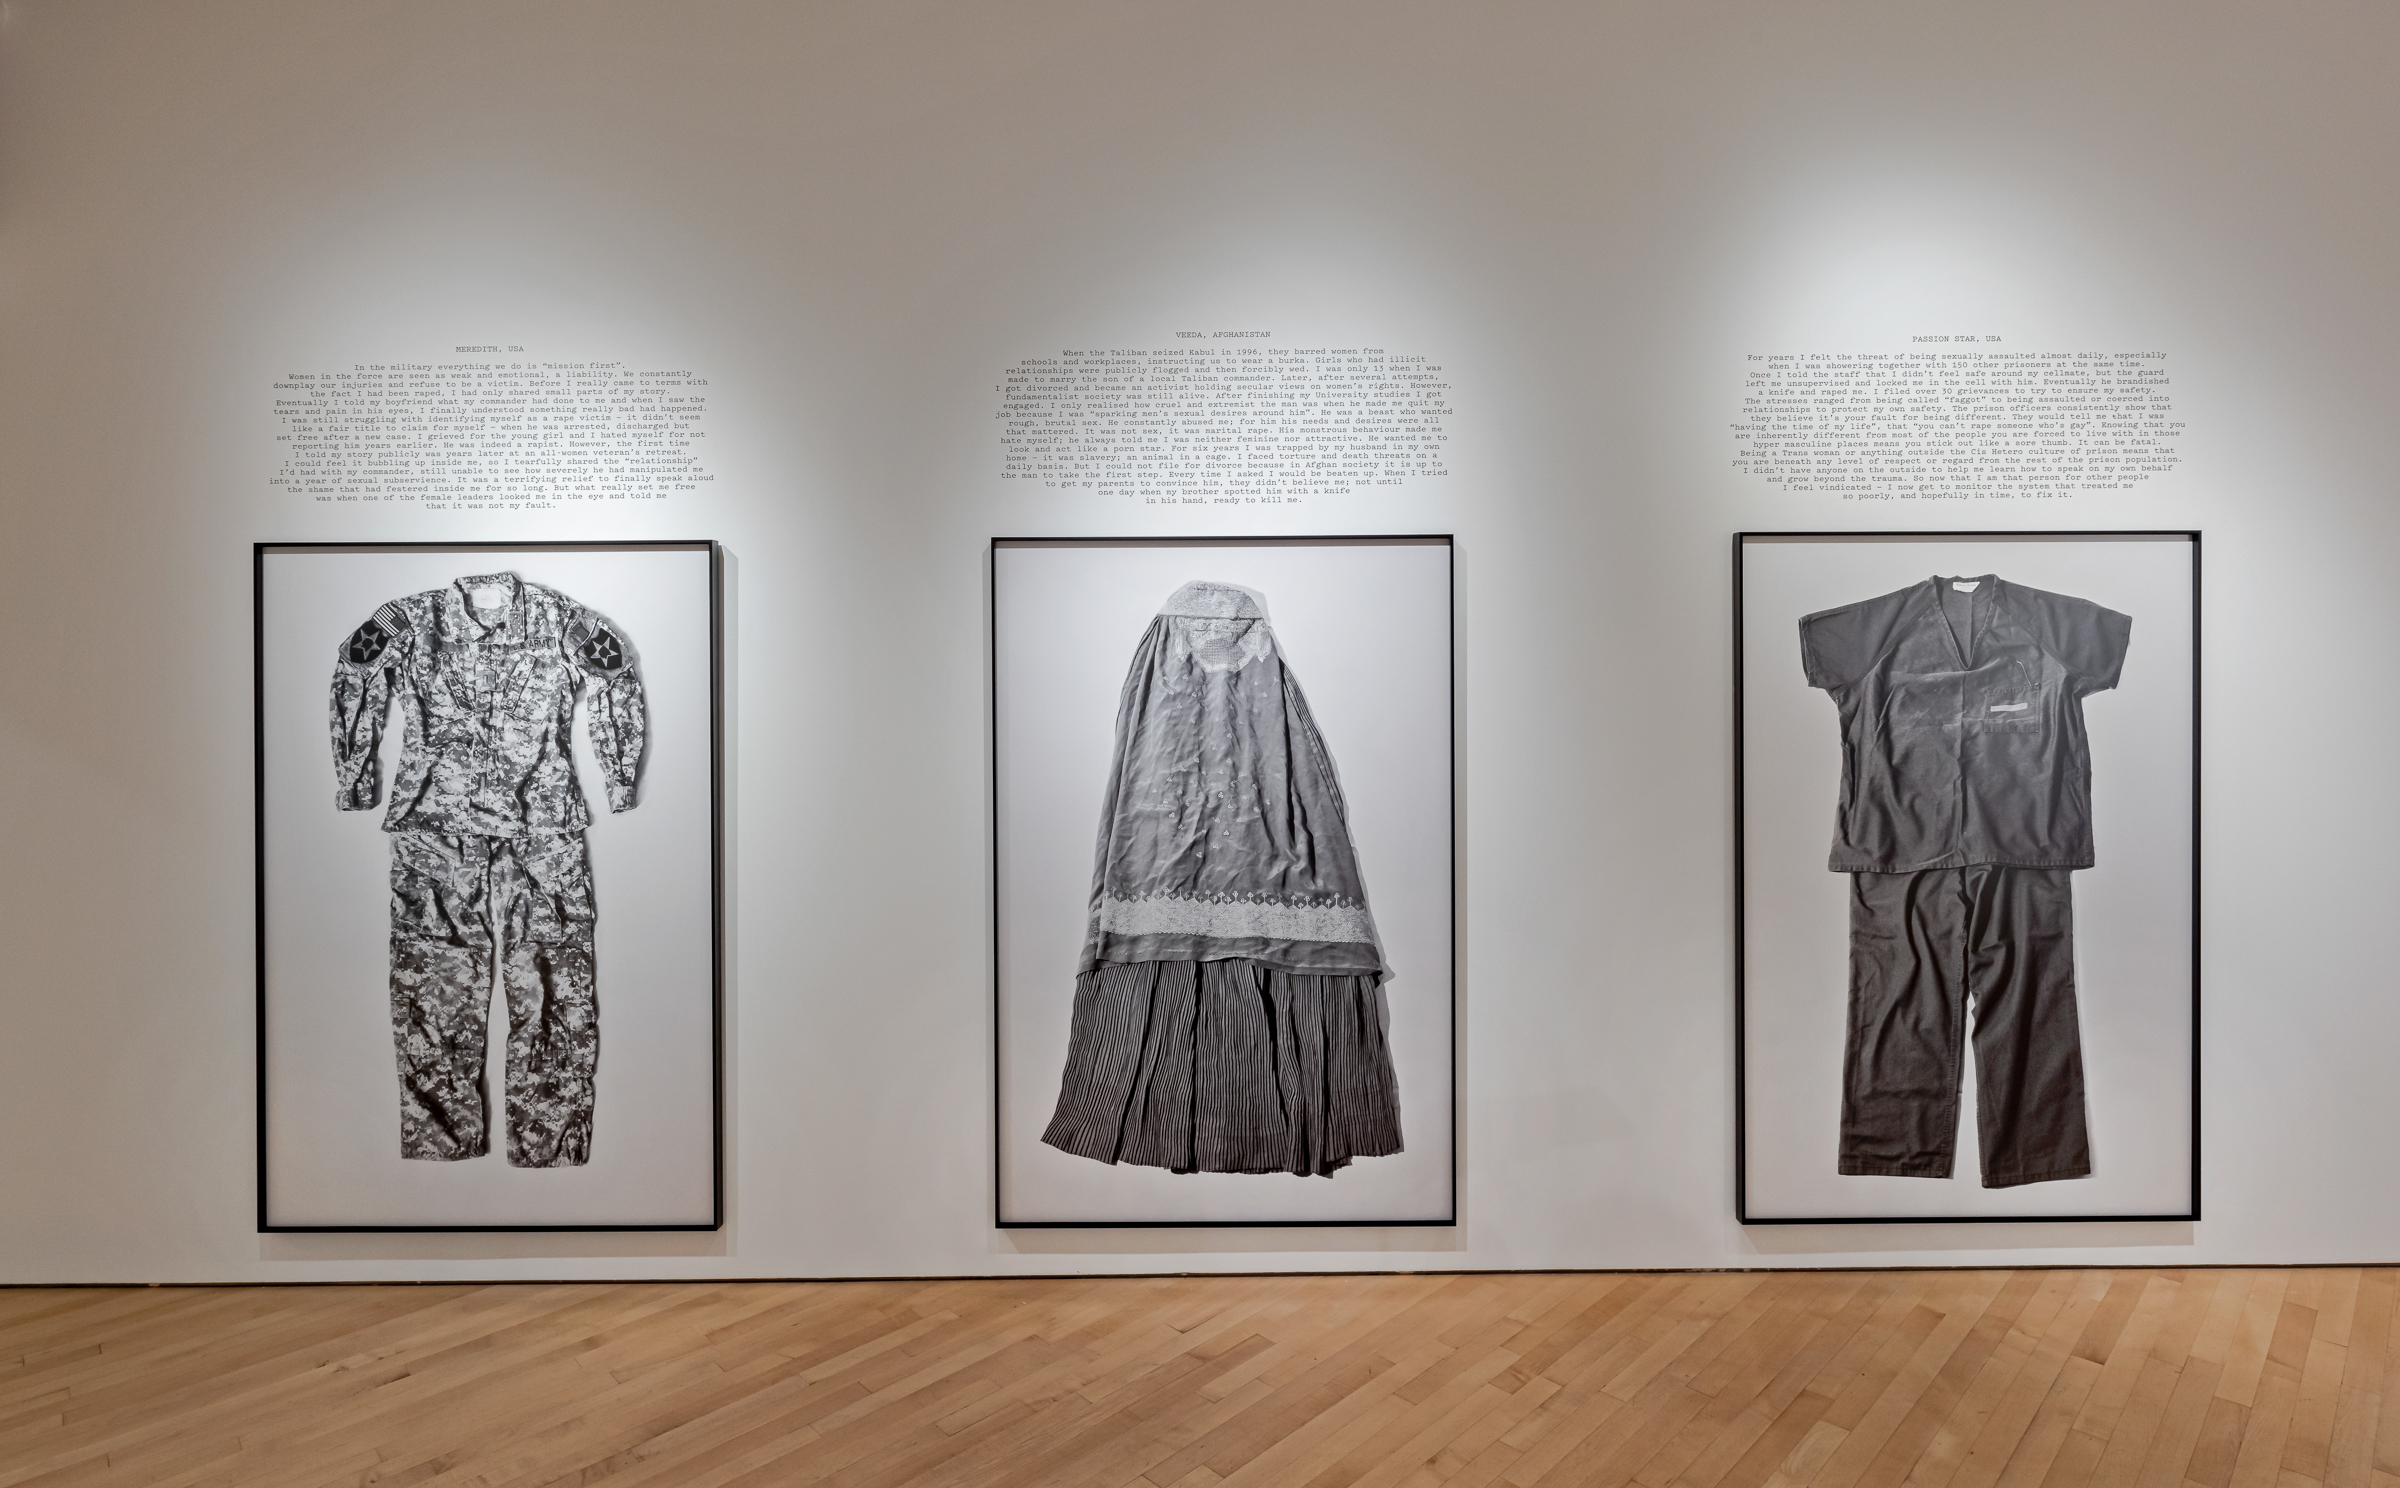     Laia Abril, A History of Misogyny Chapter Two: On Rape, installation view, CONTACT Gallery, 2021. Courtesy of the artist, Galerie Les Filles du Calvaire, and Scotiabank CONTACT Photography Festival. Photo: Toni Hafkenscheid

